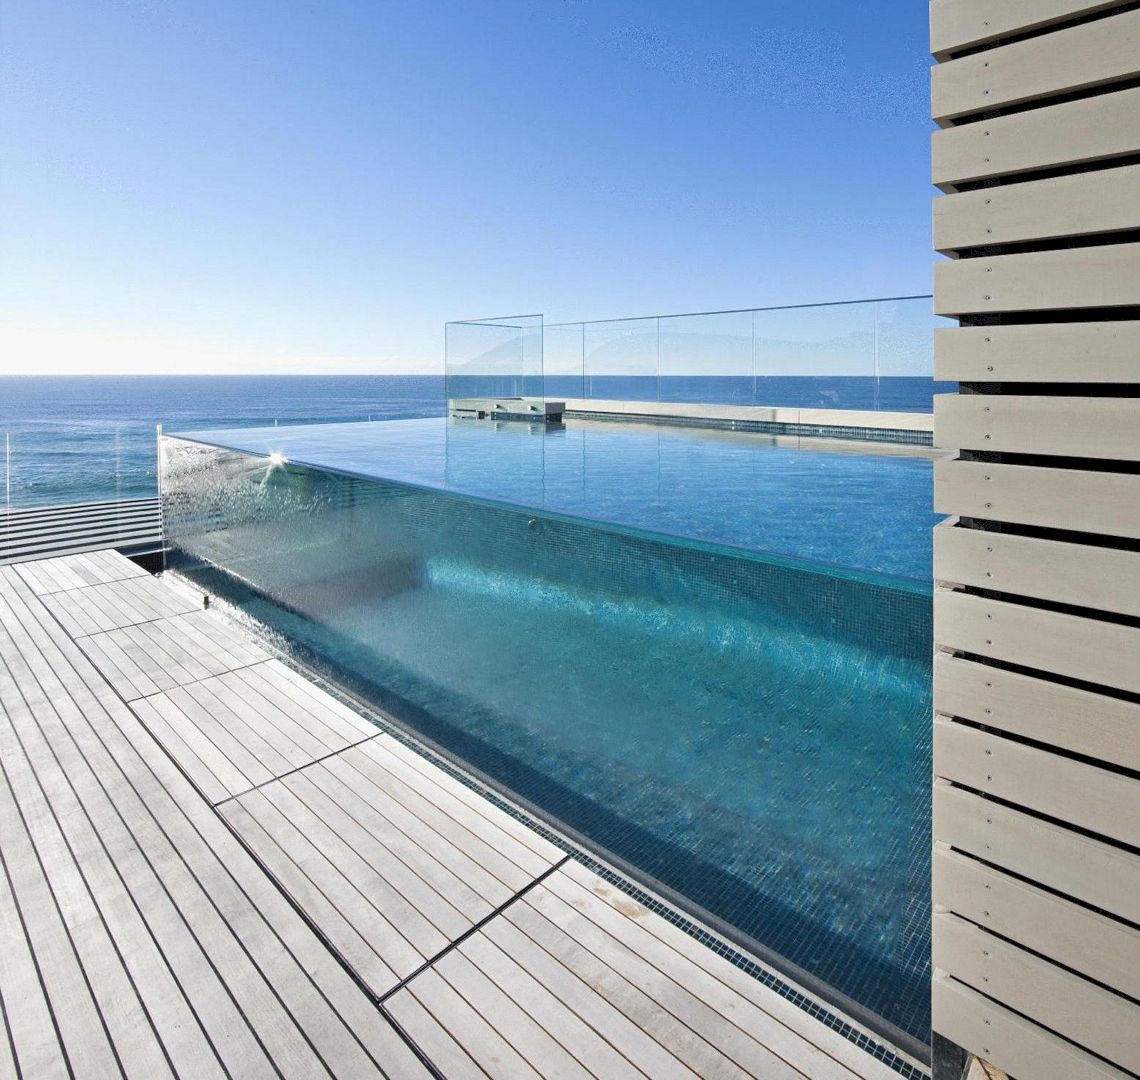 Clear acrylic pool wall manufacturer and installer Luxury Acrylic swimming Pools-leyu